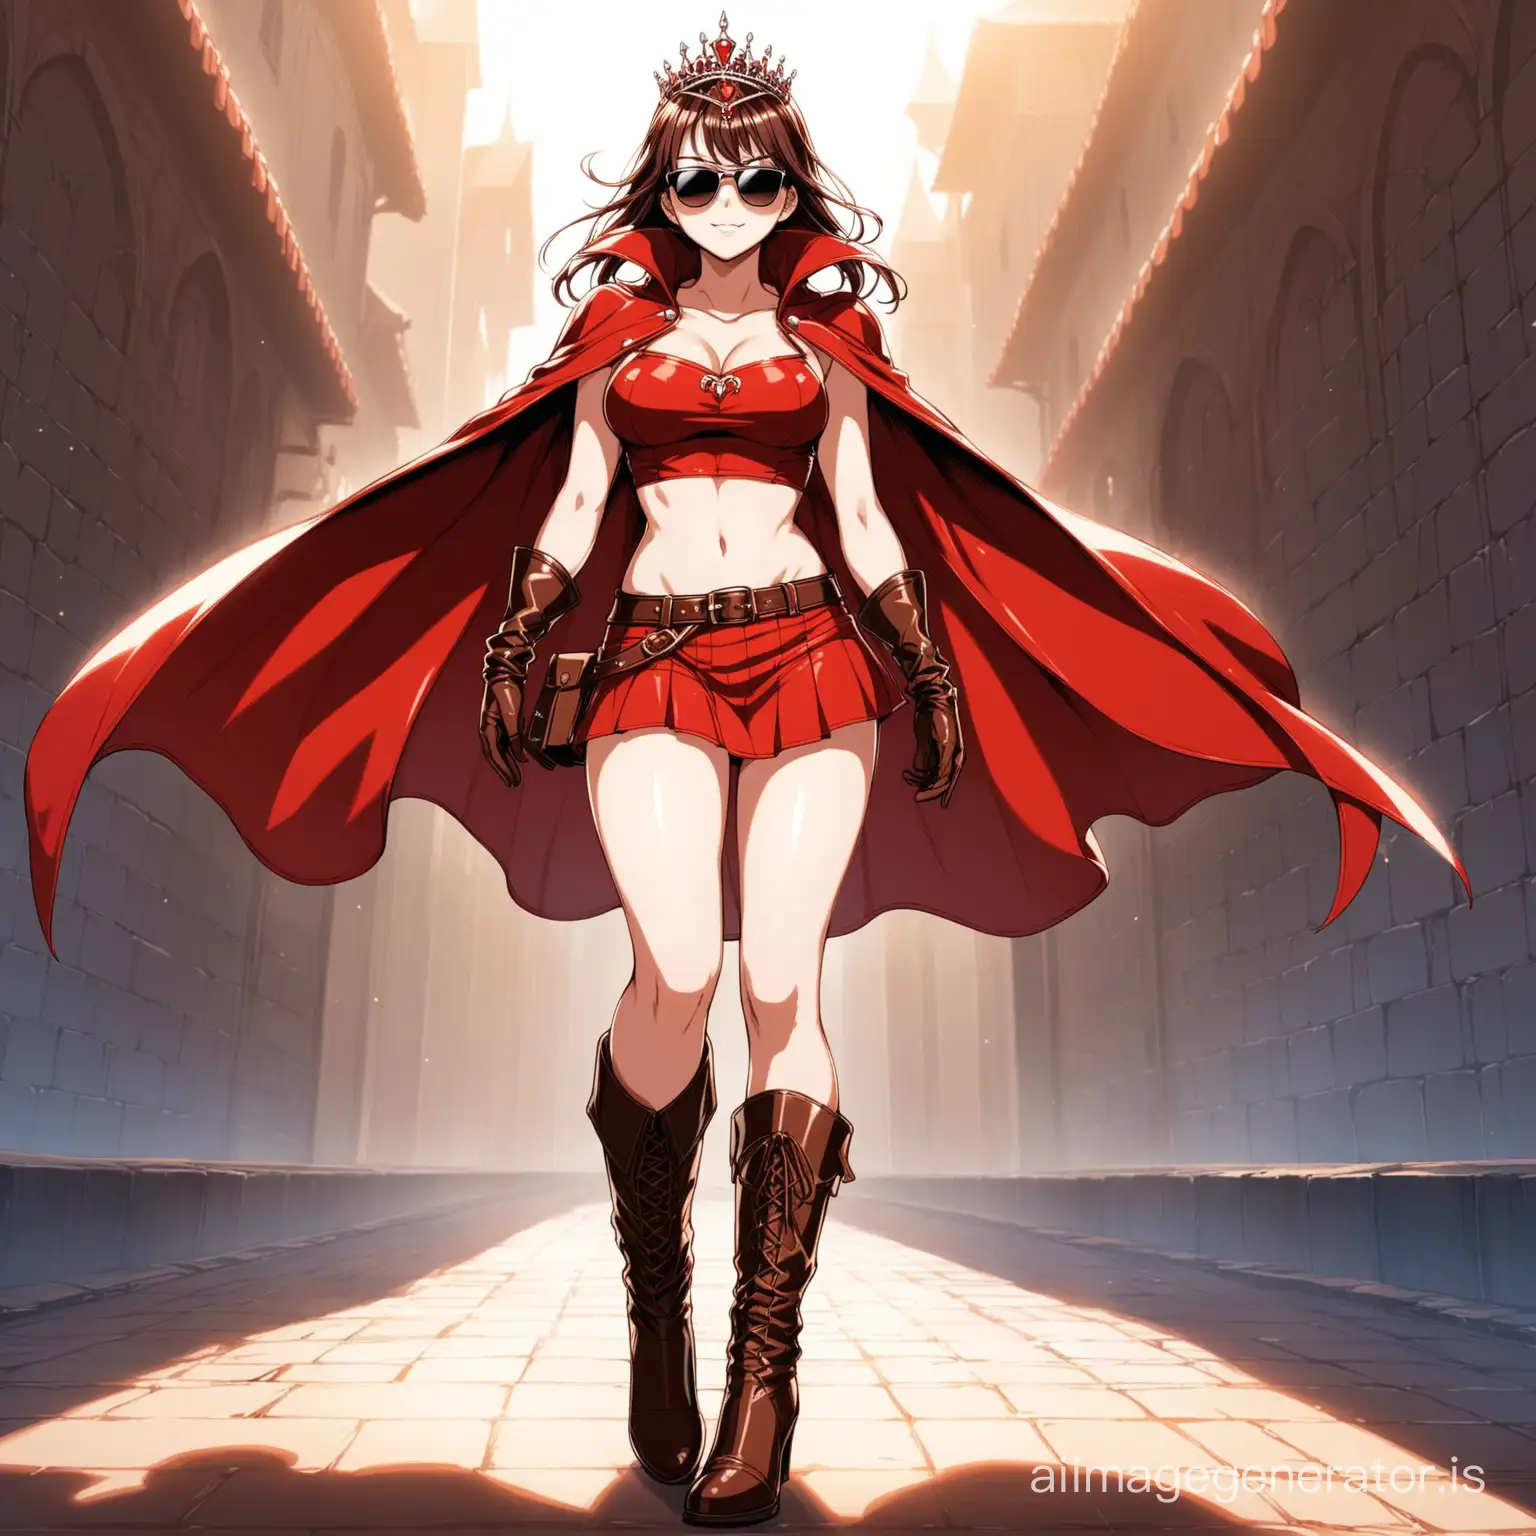 hot anime girl in red croptop, skirt, leather gloves, leather boots heels and a cape reaching her boots 
she also wears a pair of sunglasses and a tiara